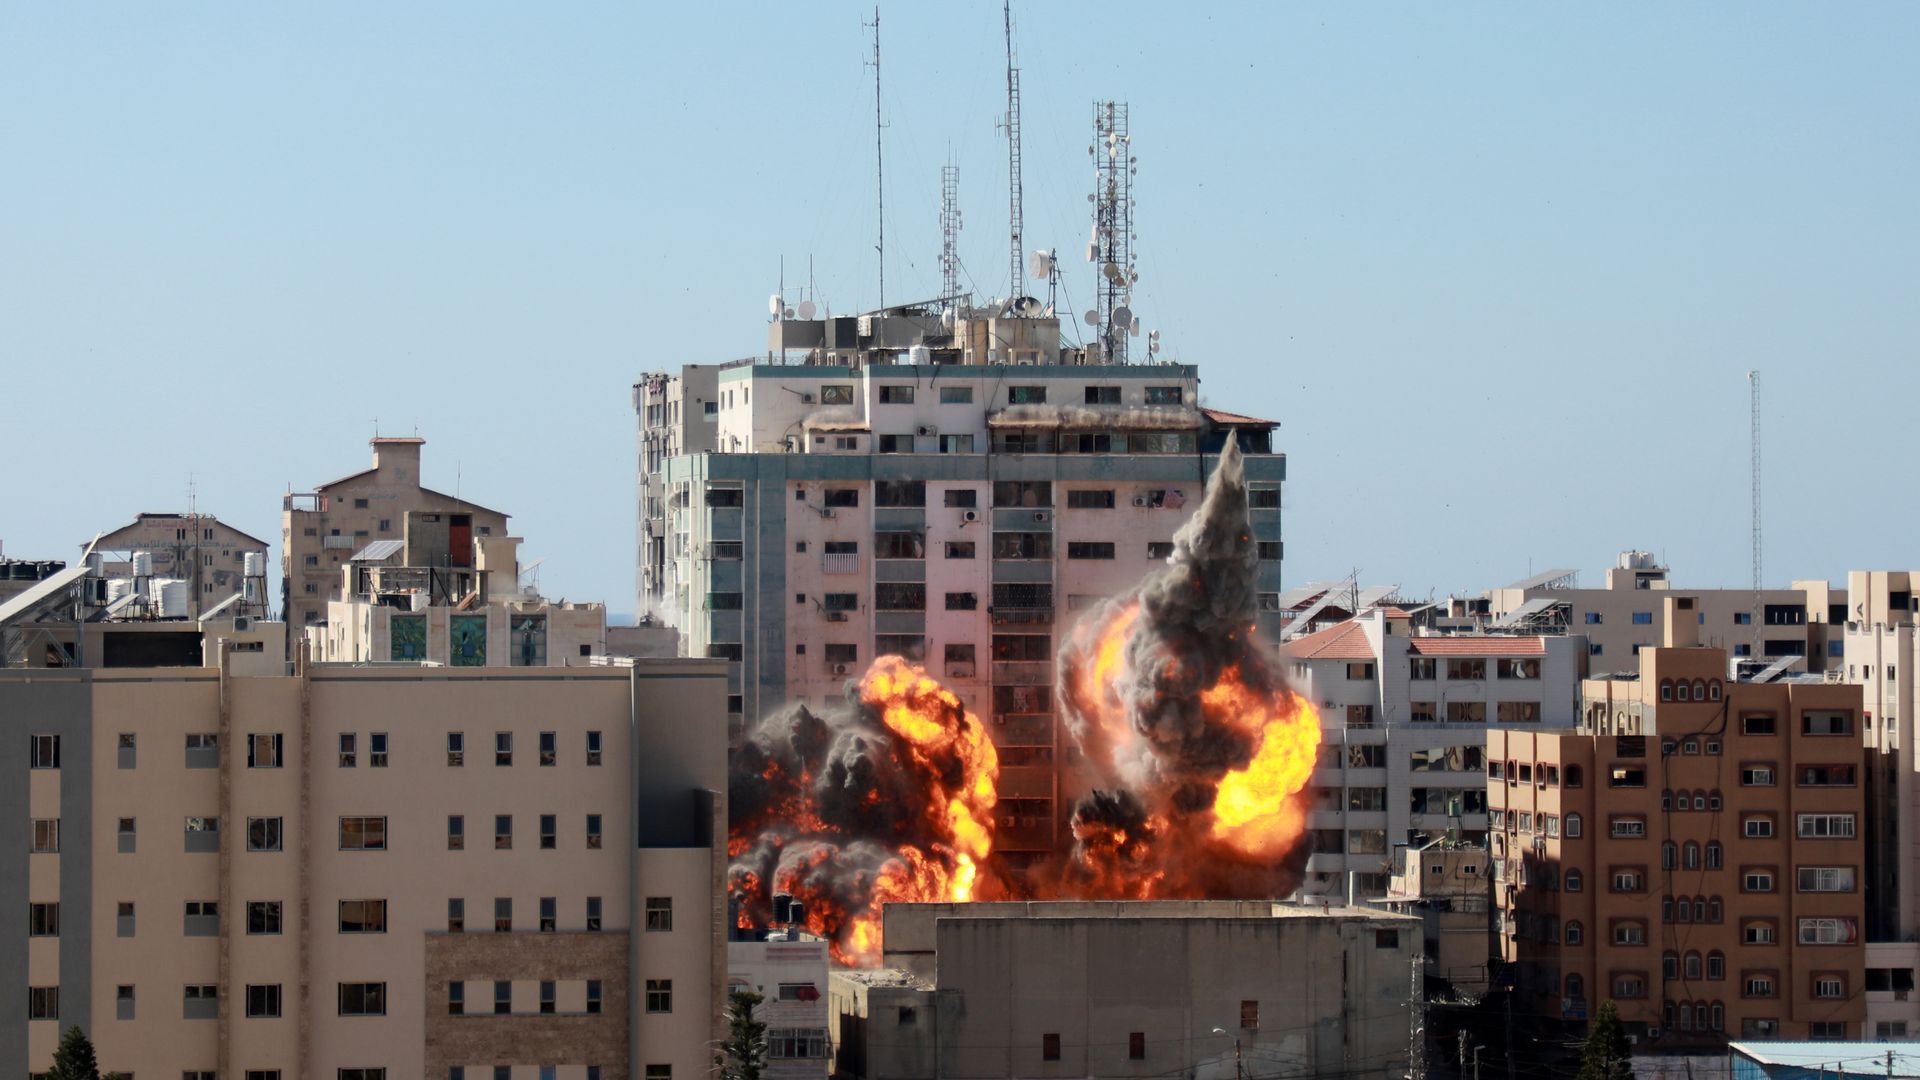 Picture of Jala Tower on fire and on the verge of collapse. It housed media offices of Associated Press, Al Jazeera and others